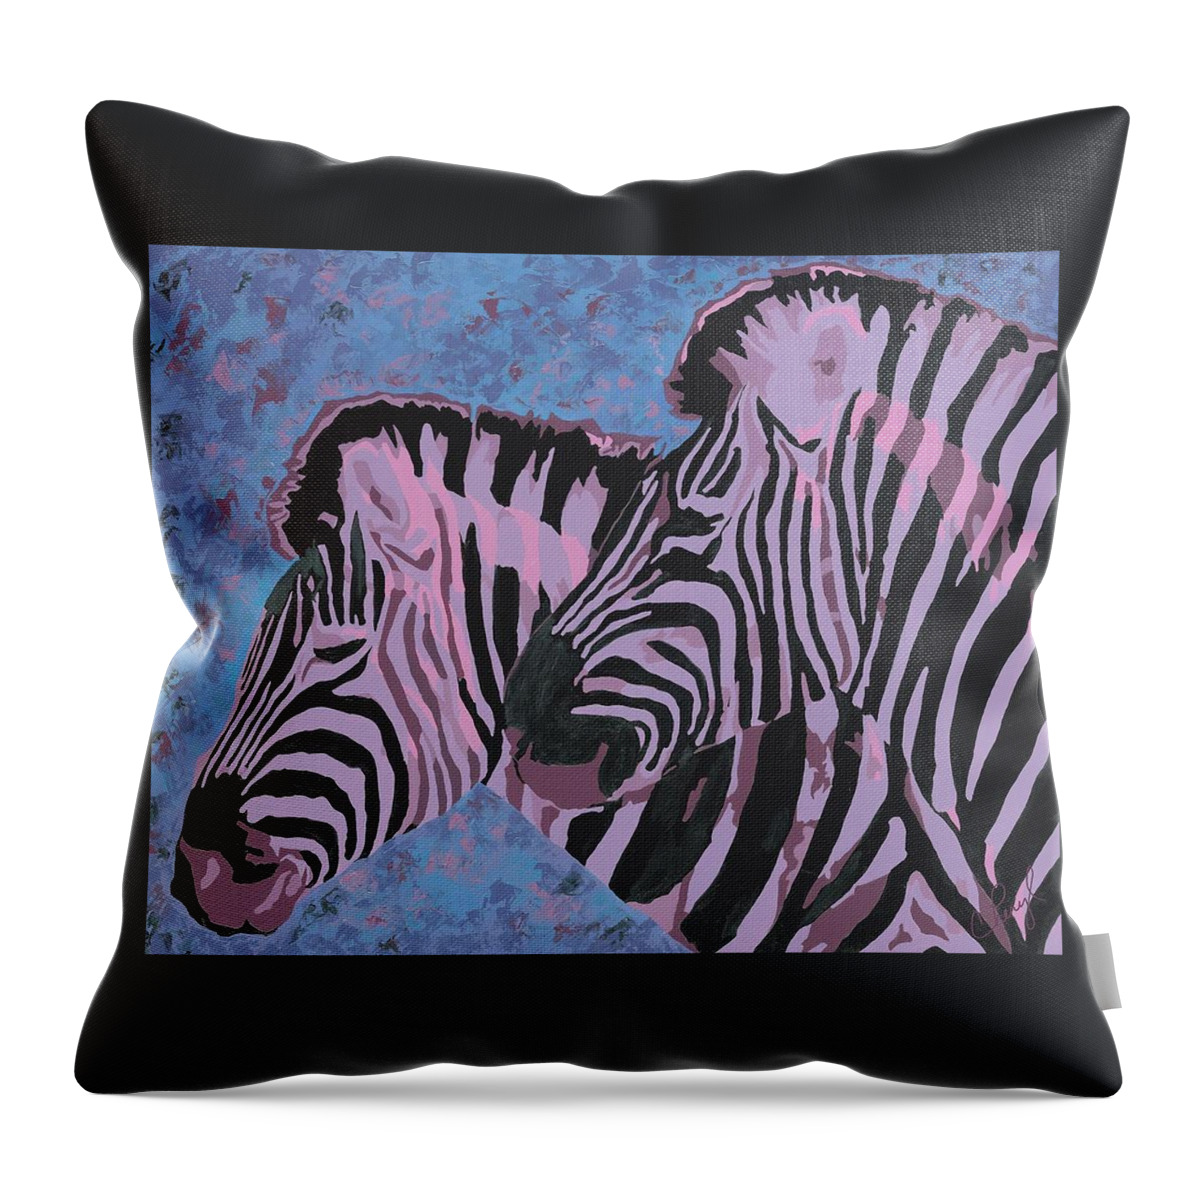 Zebra Throw Pillow featuring the painting Me And My gal by Cheryl Bowman